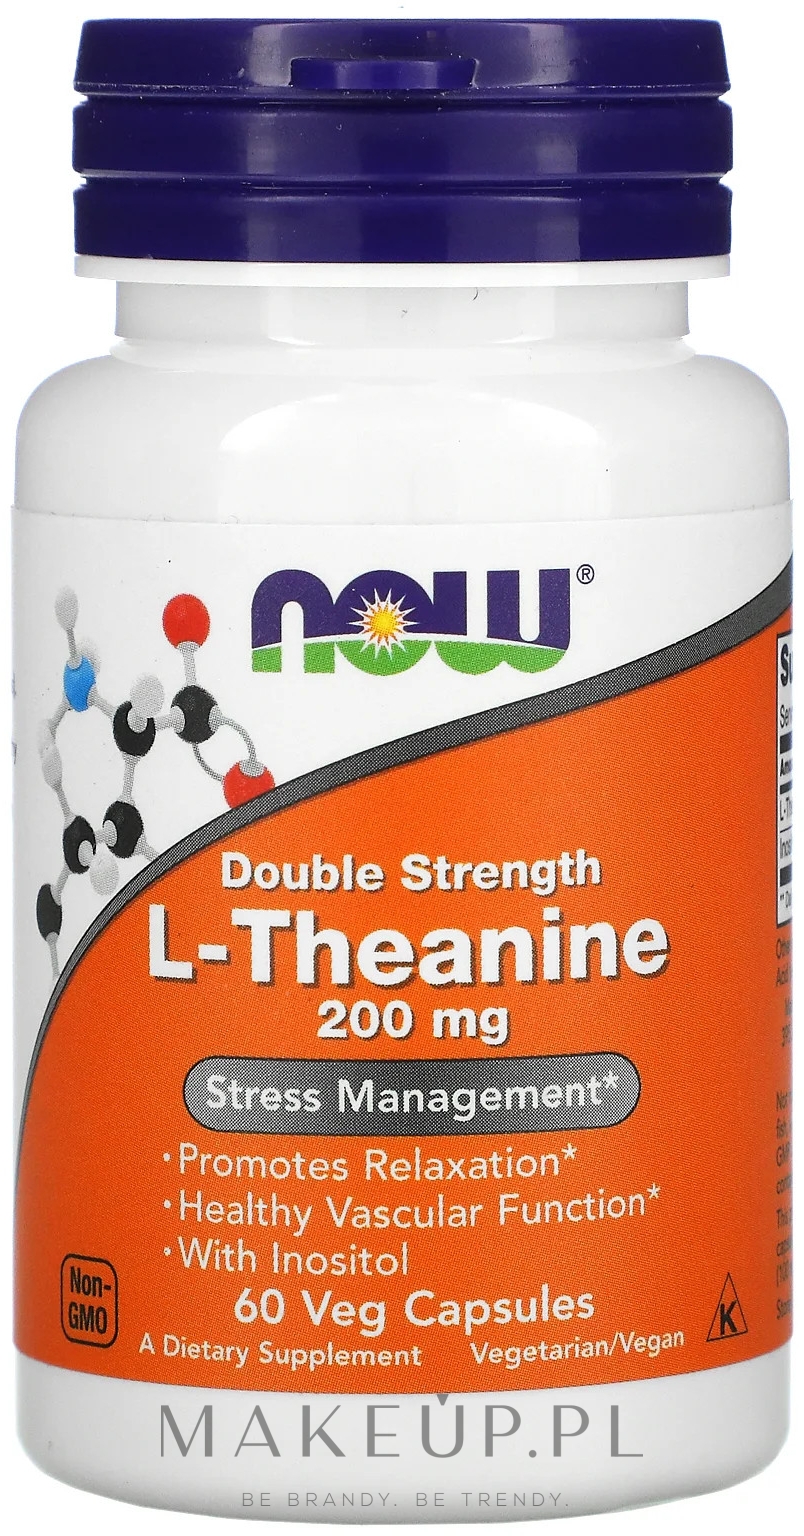 Suplement diety Teina, 200 mg - Now Foods L-Theanine Double Strength Veg Capsules — Zdjęcie 60 szt.